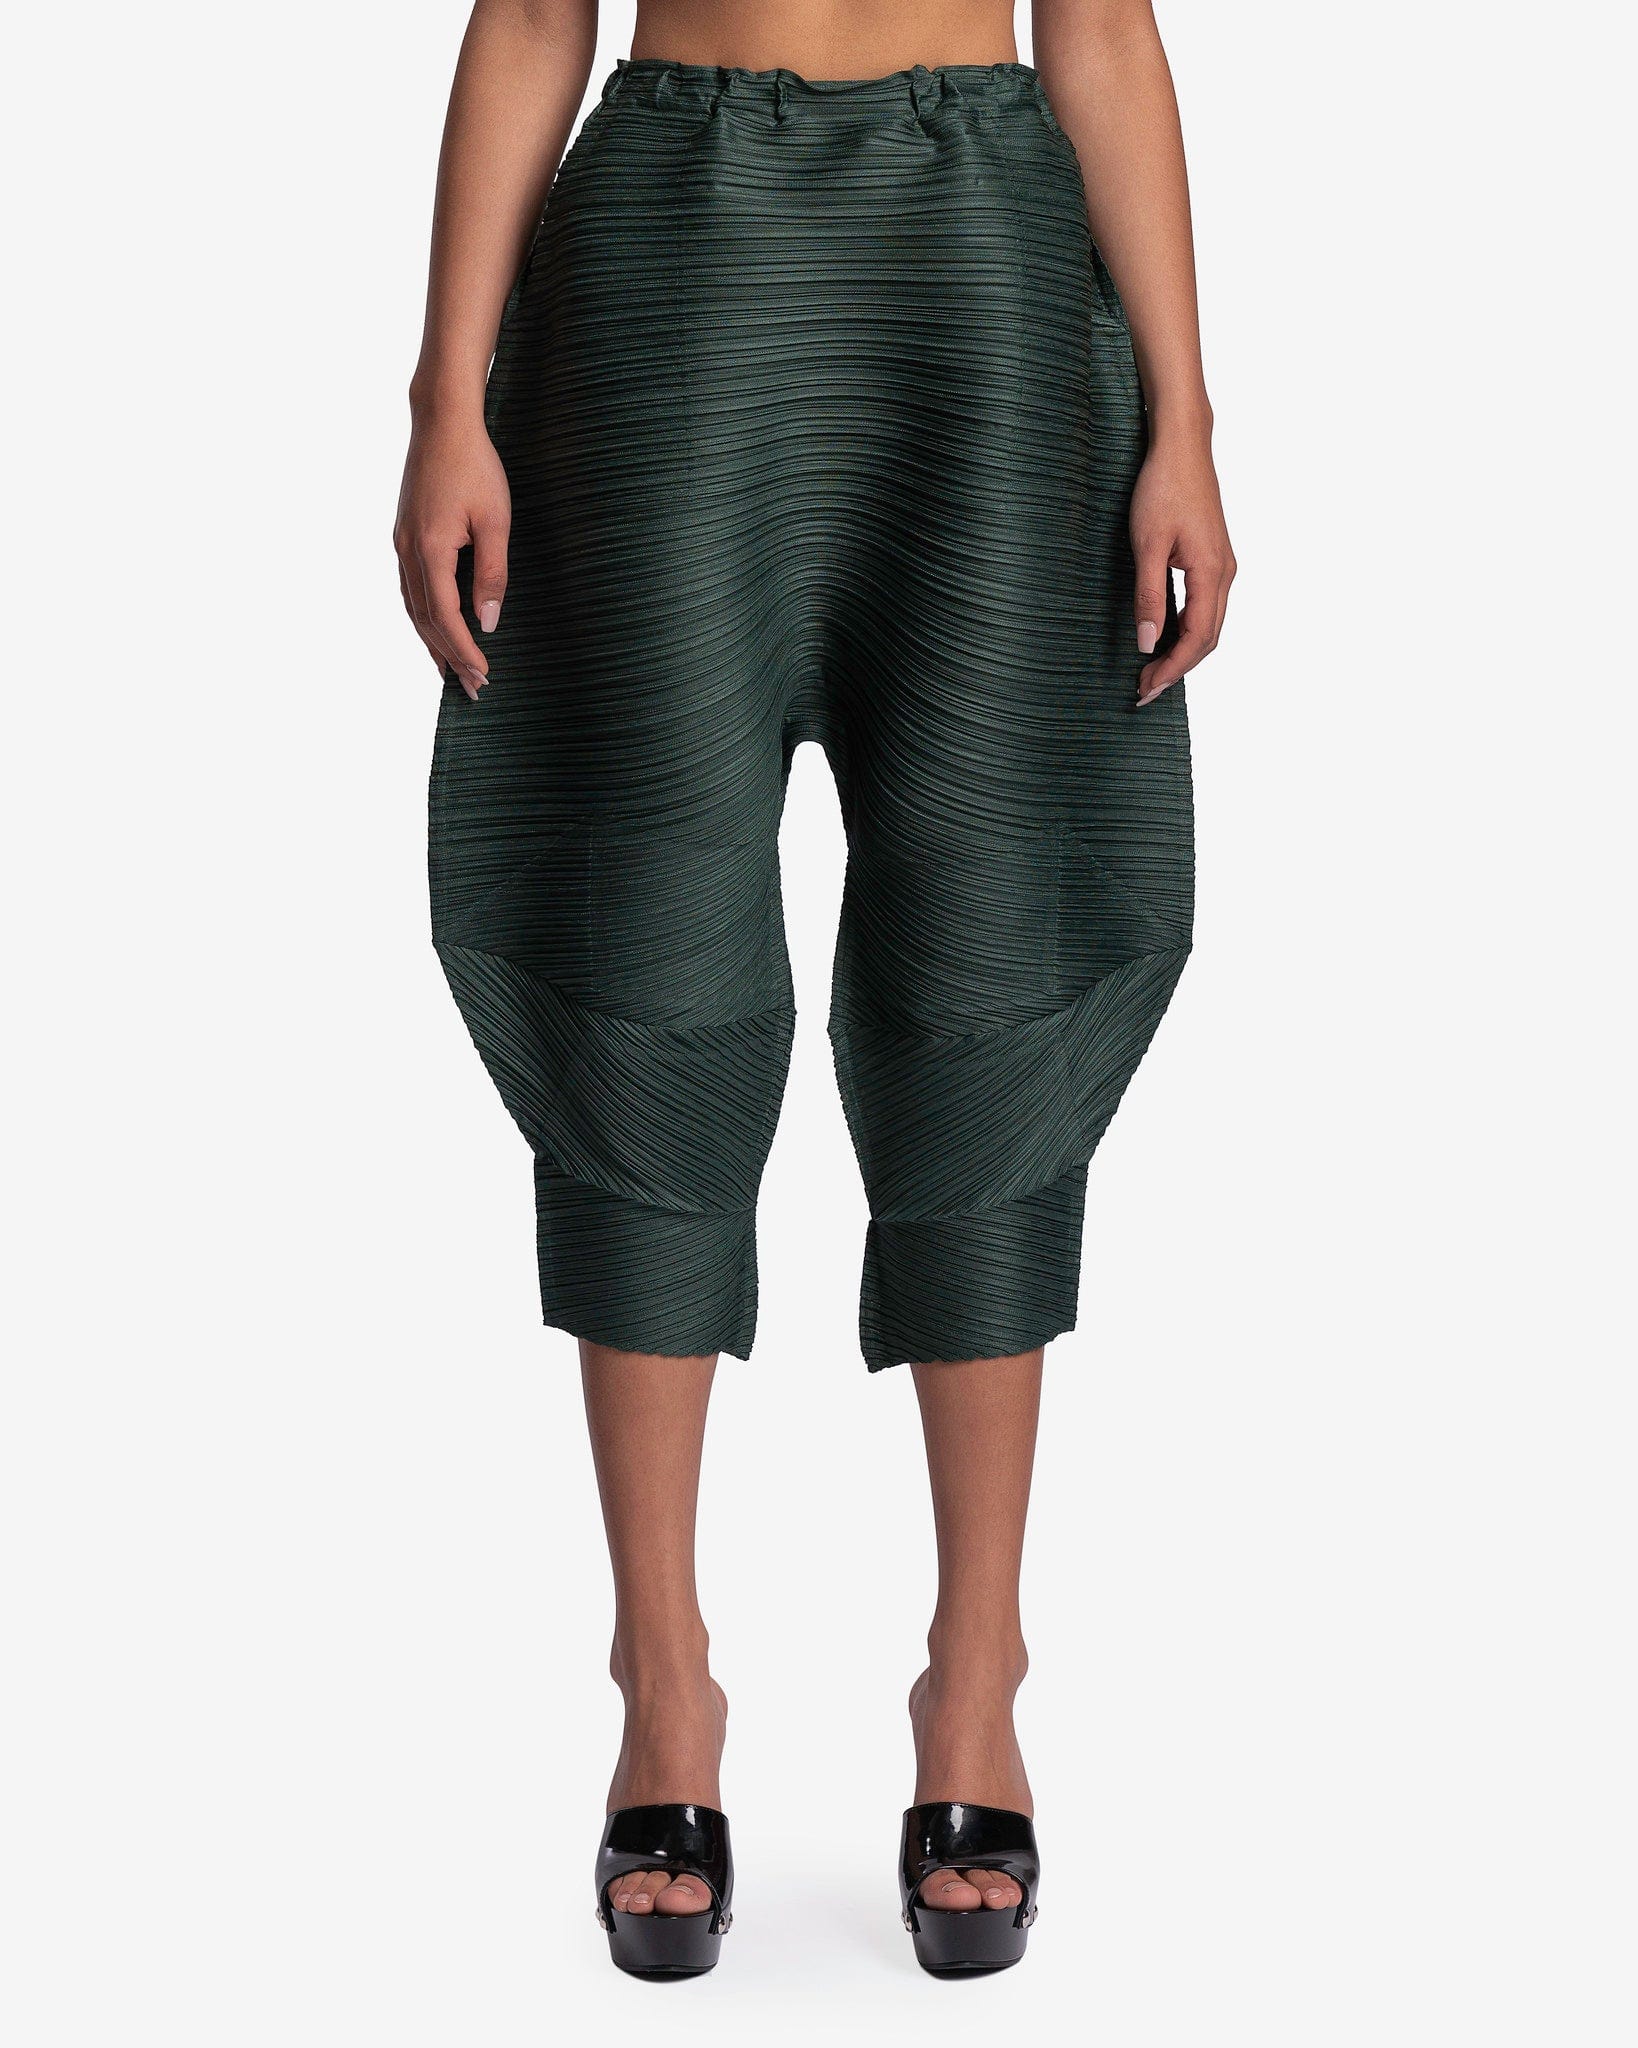 Thicker Bounce Pants in Dark Green